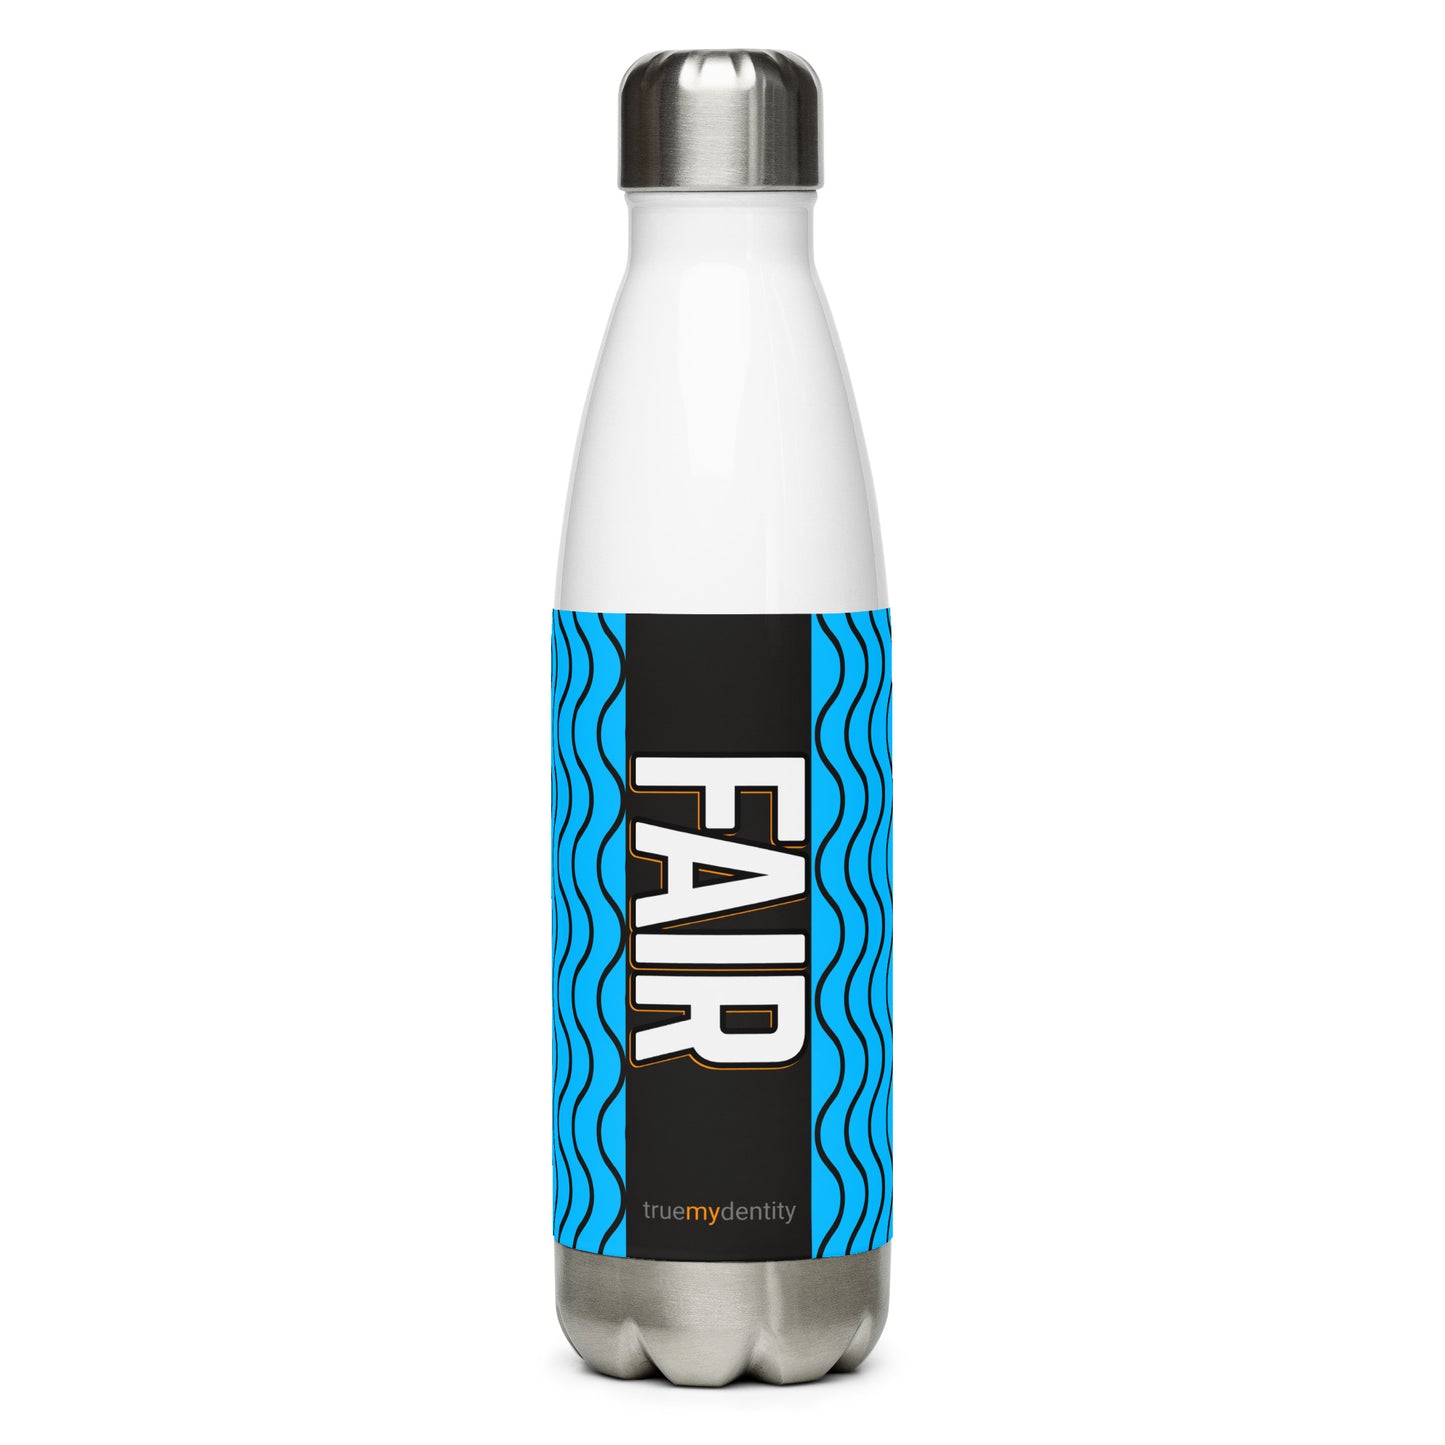 FAIR Stainless Steel Water Bottle Blue Wave Design, 17 oz, in Black or White